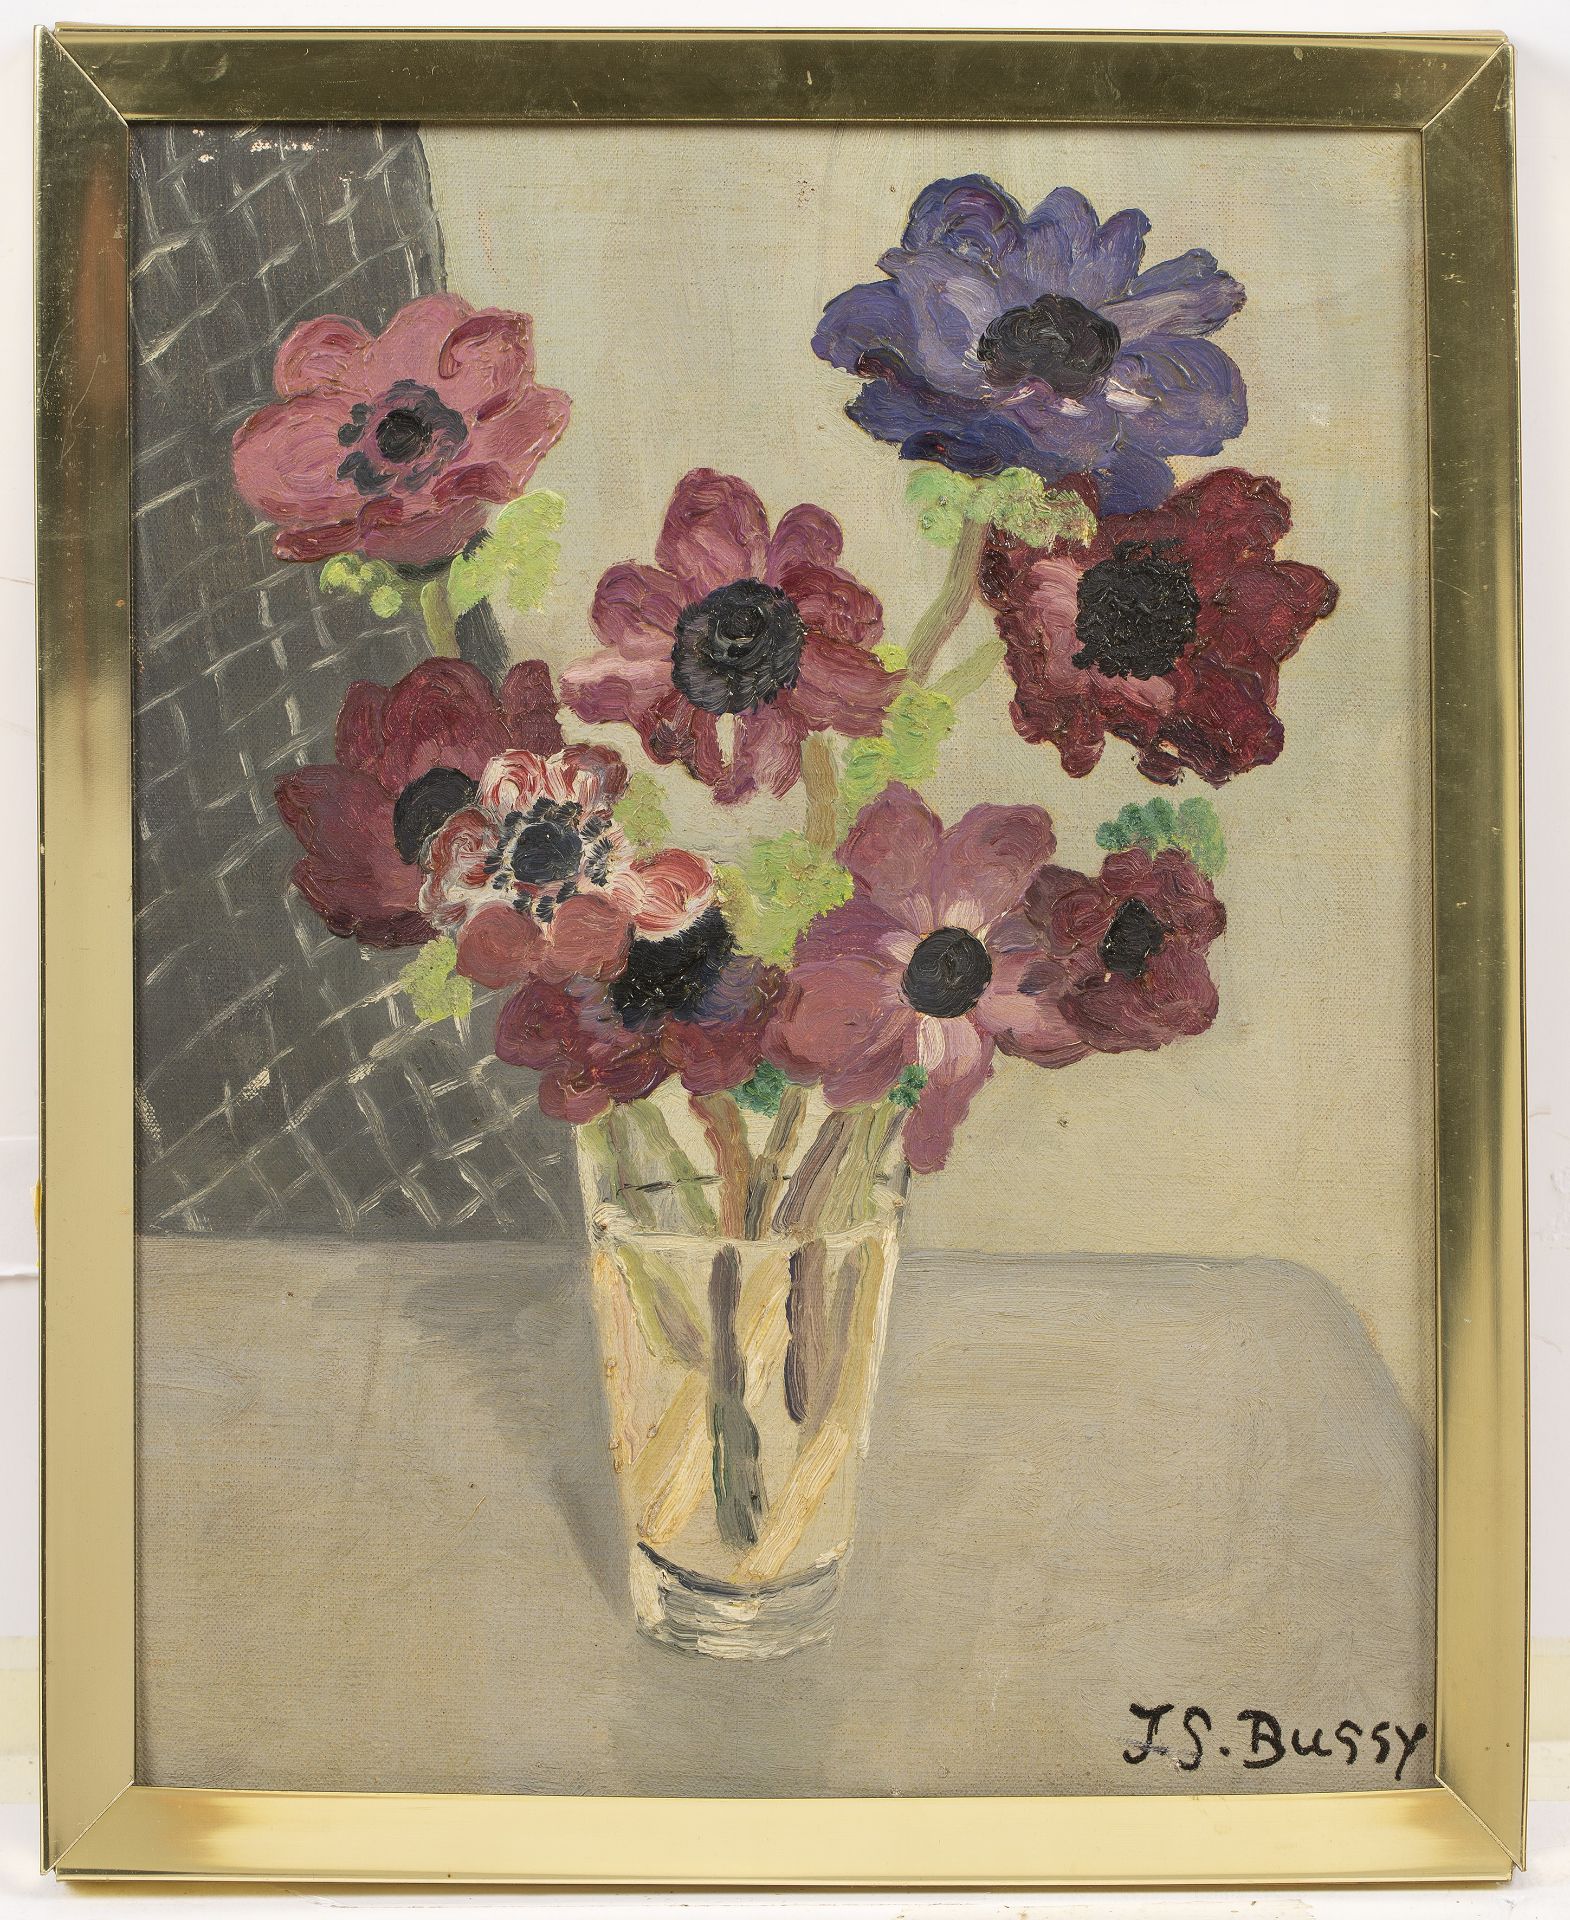 Jane Bussy (1906-1960) 'Vase of Flowers', oil on canvas, signed 'J.S Bussy' to the lower right, 32cm - Image 2 of 3